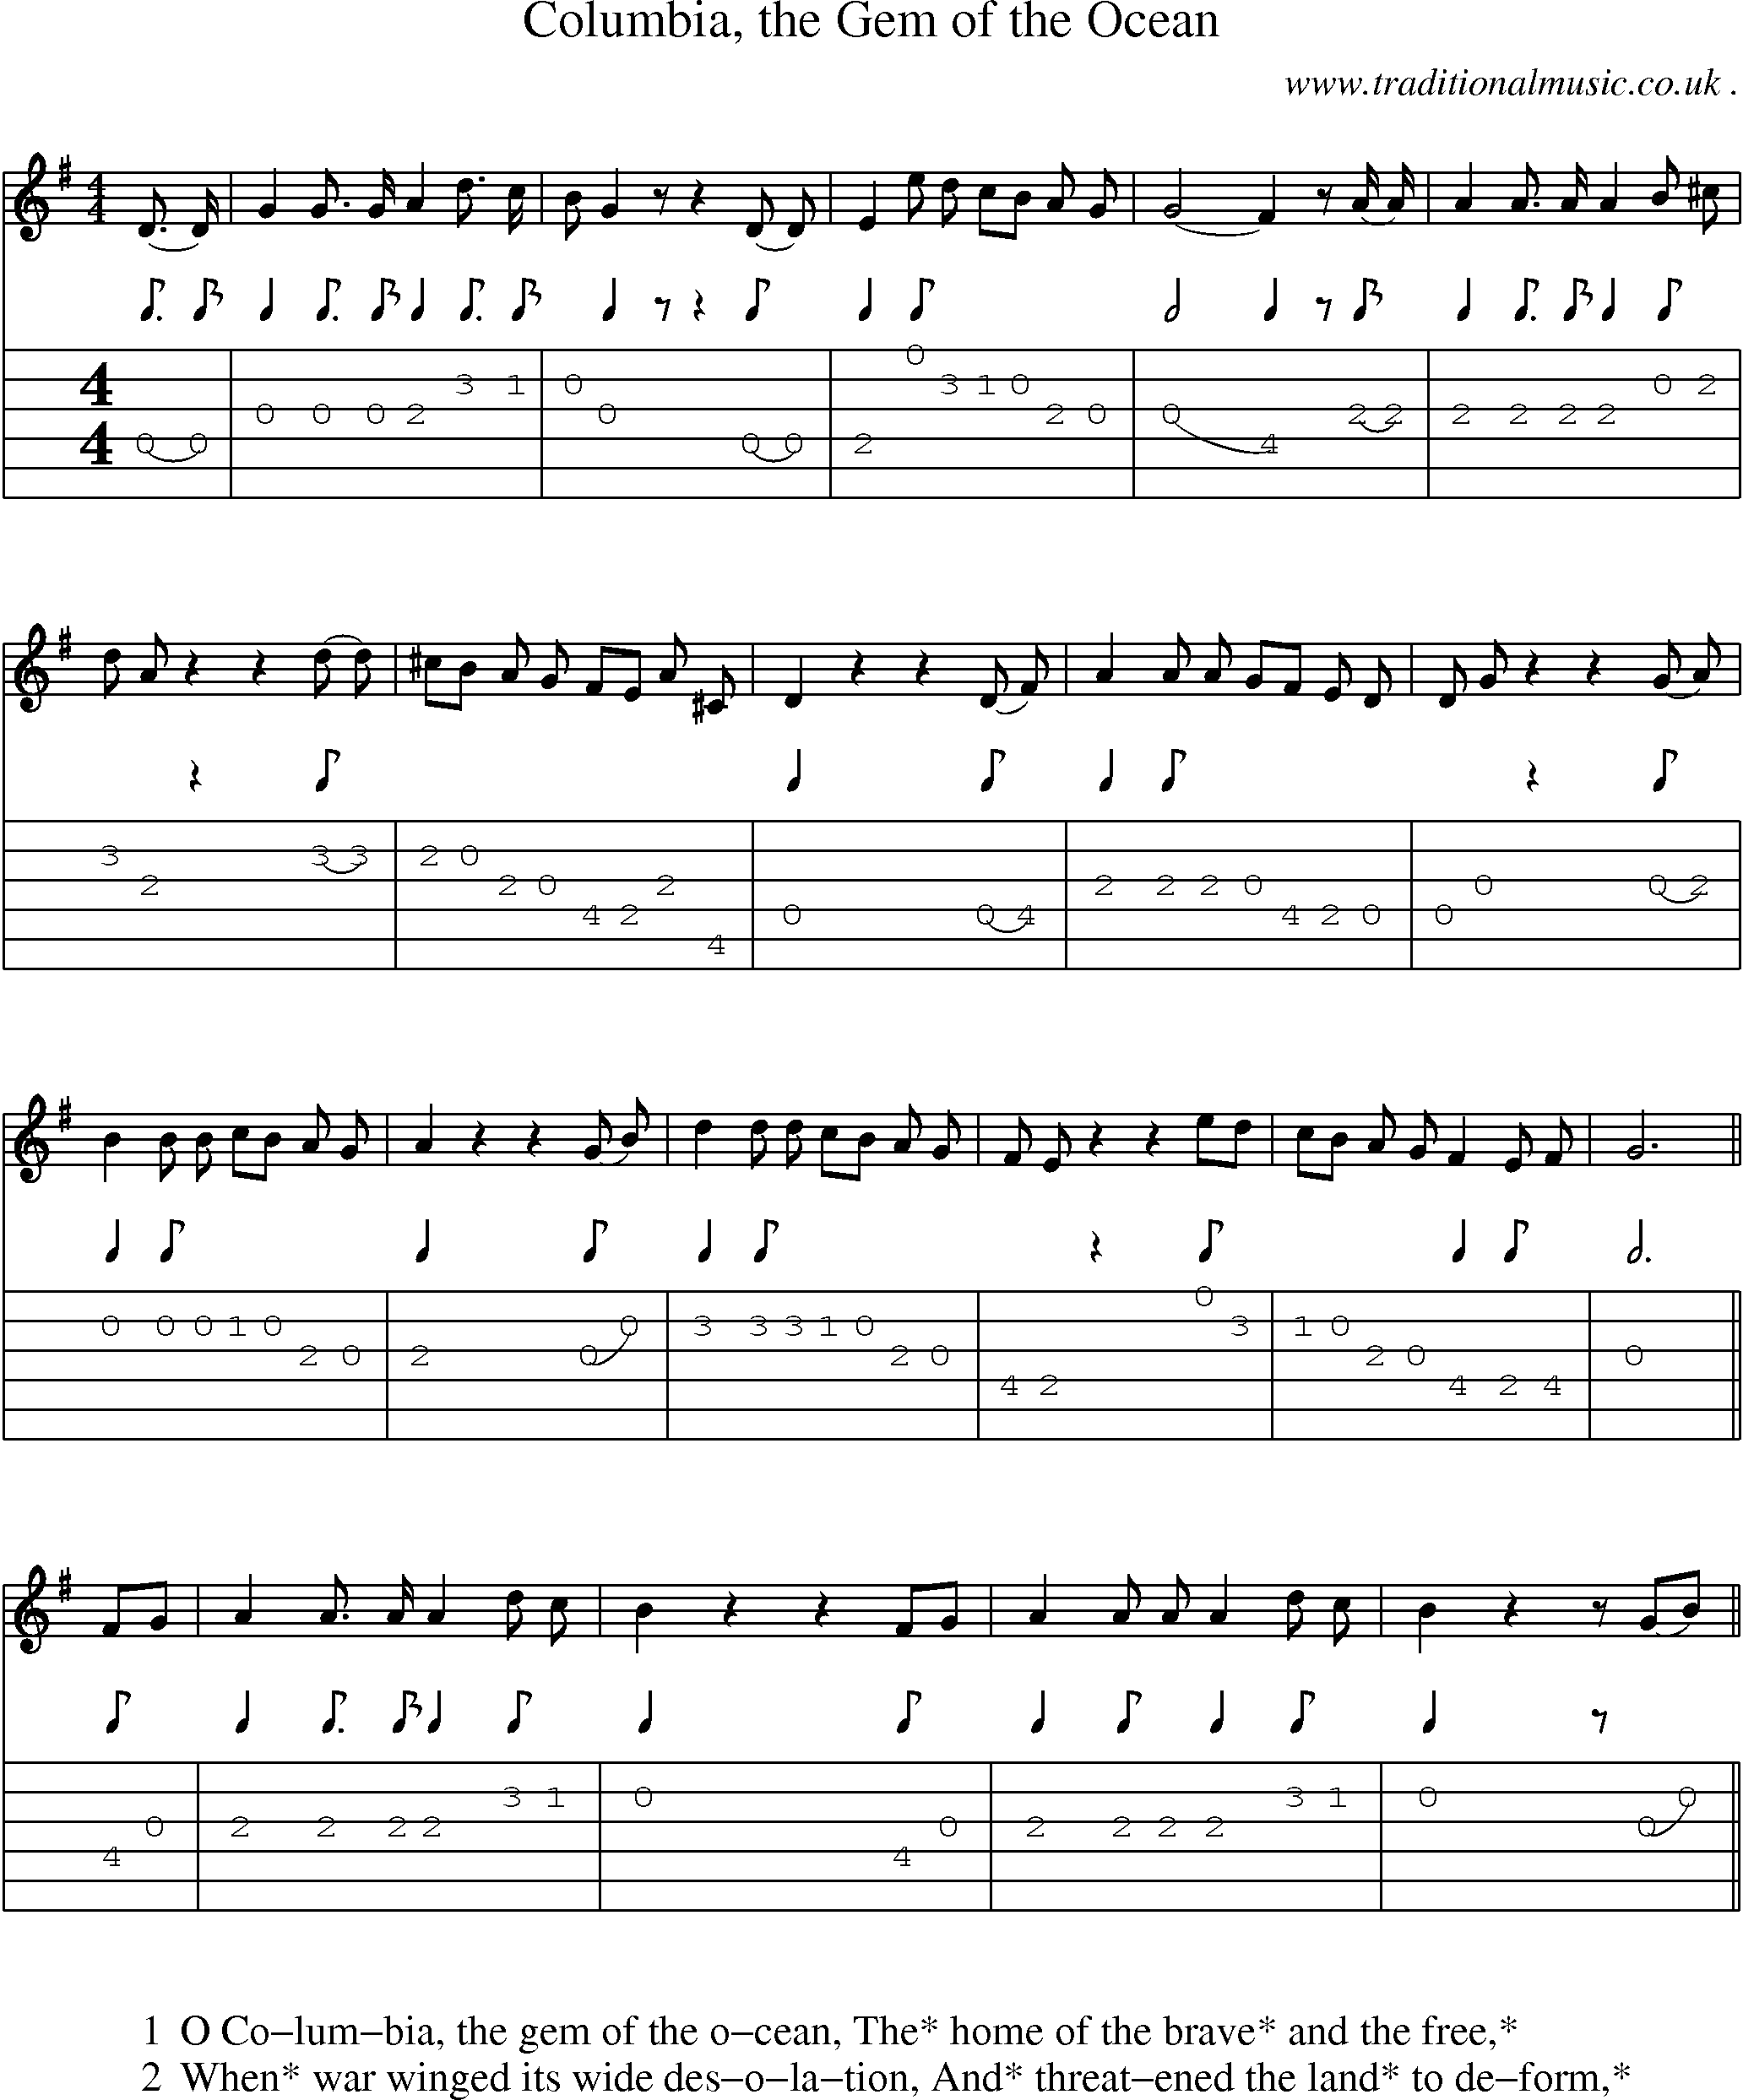 Music Score and Guitar Tabs for Columbia The Gem Of The Ocean